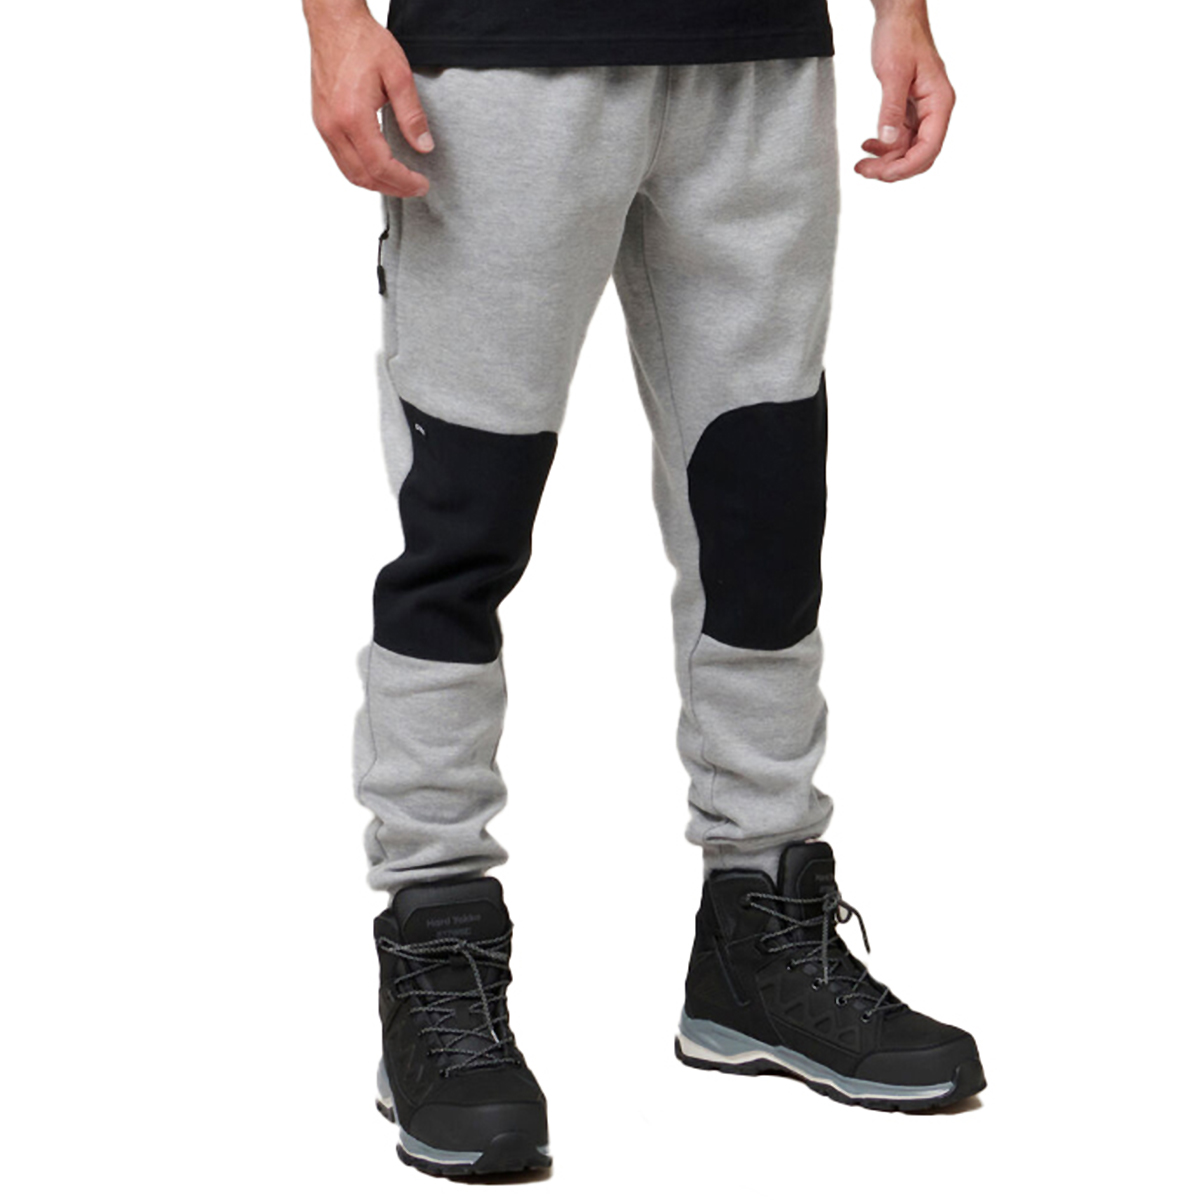 Hard Yakka Xtreme Pant Y02552 - The Workers Shop